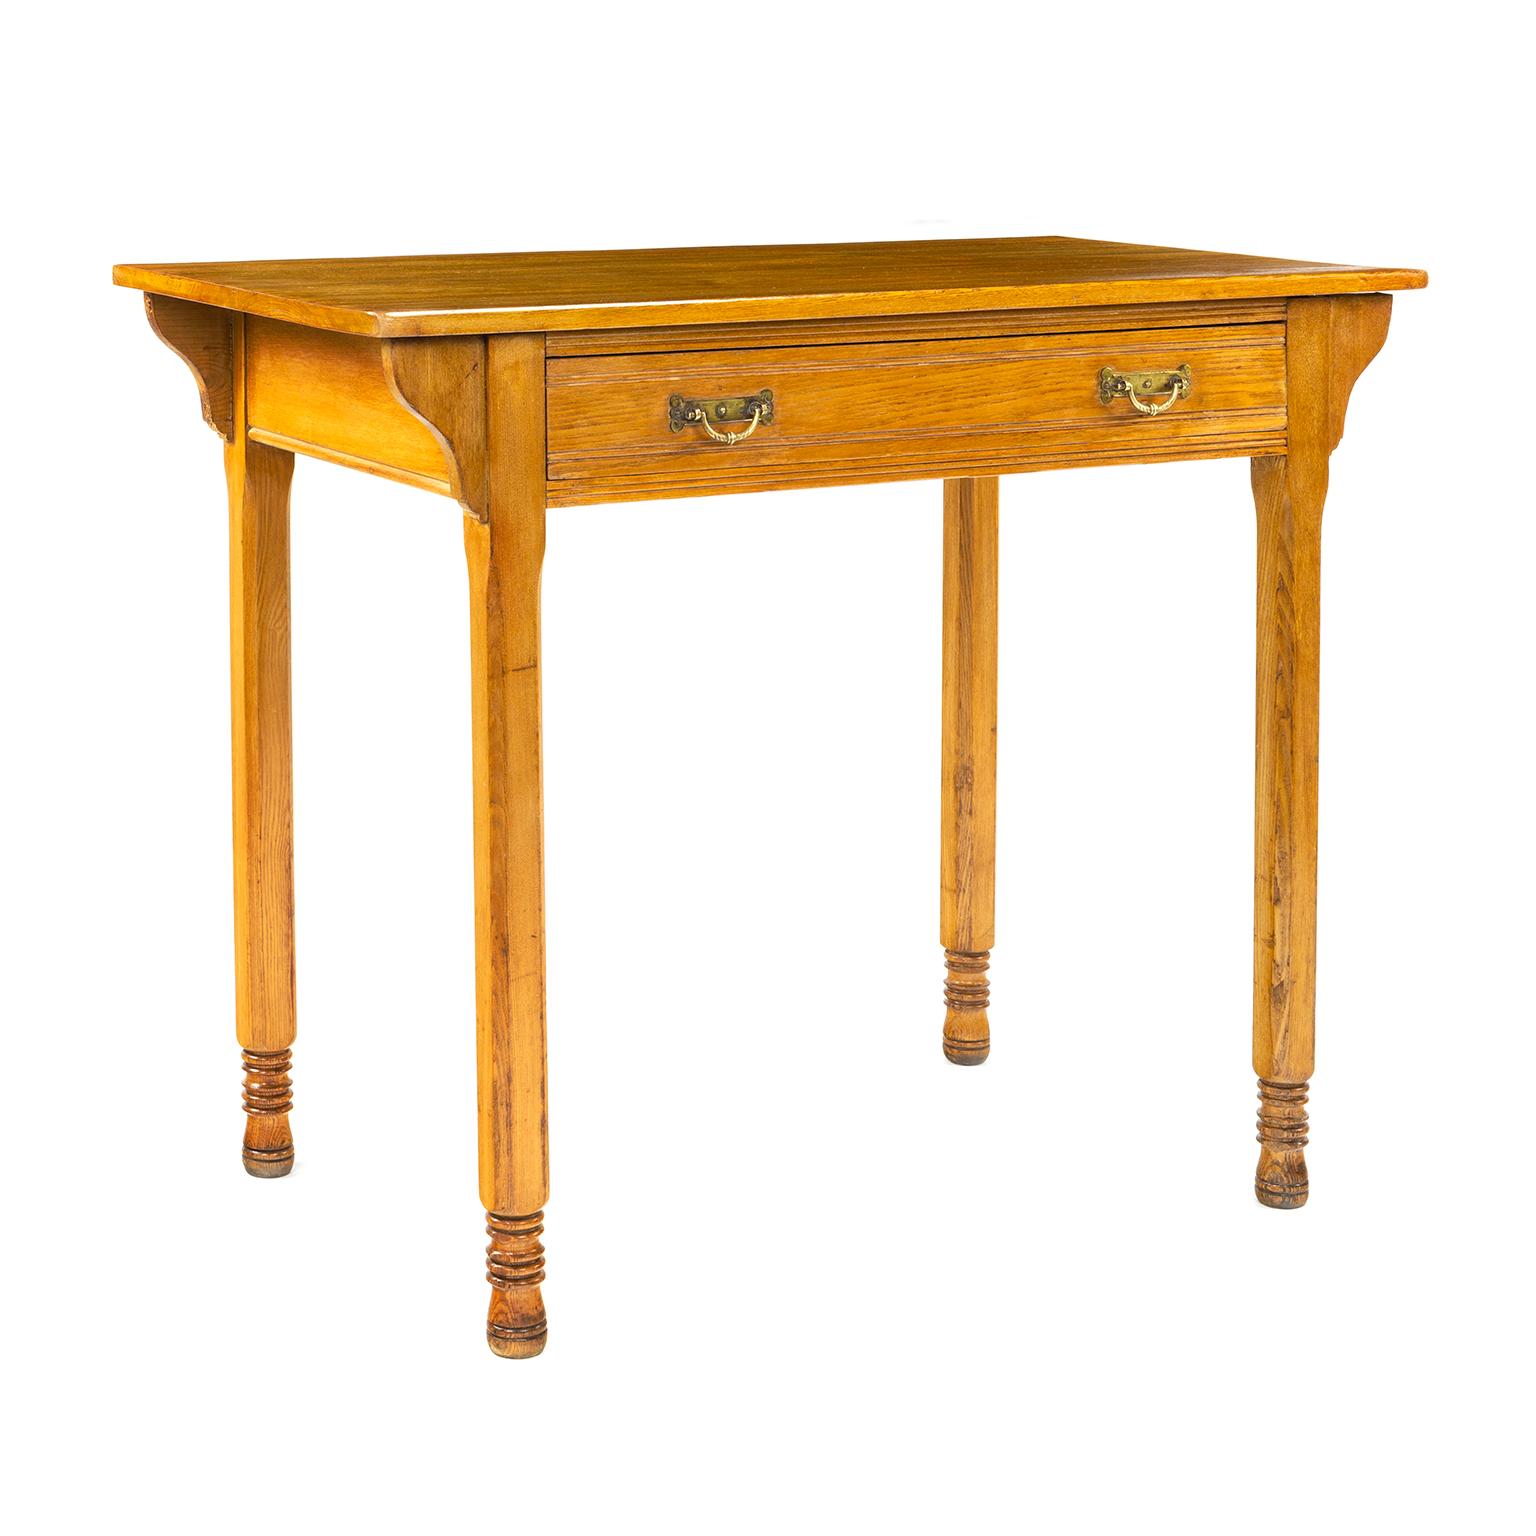 An ash side table by Gillows of Lancaster and London, signed by the maker, 19th century. This type of table is versatile and was used in hallways, bedrooms and living areas. As well as the makers stamp this table carries the letters L 13194 this is